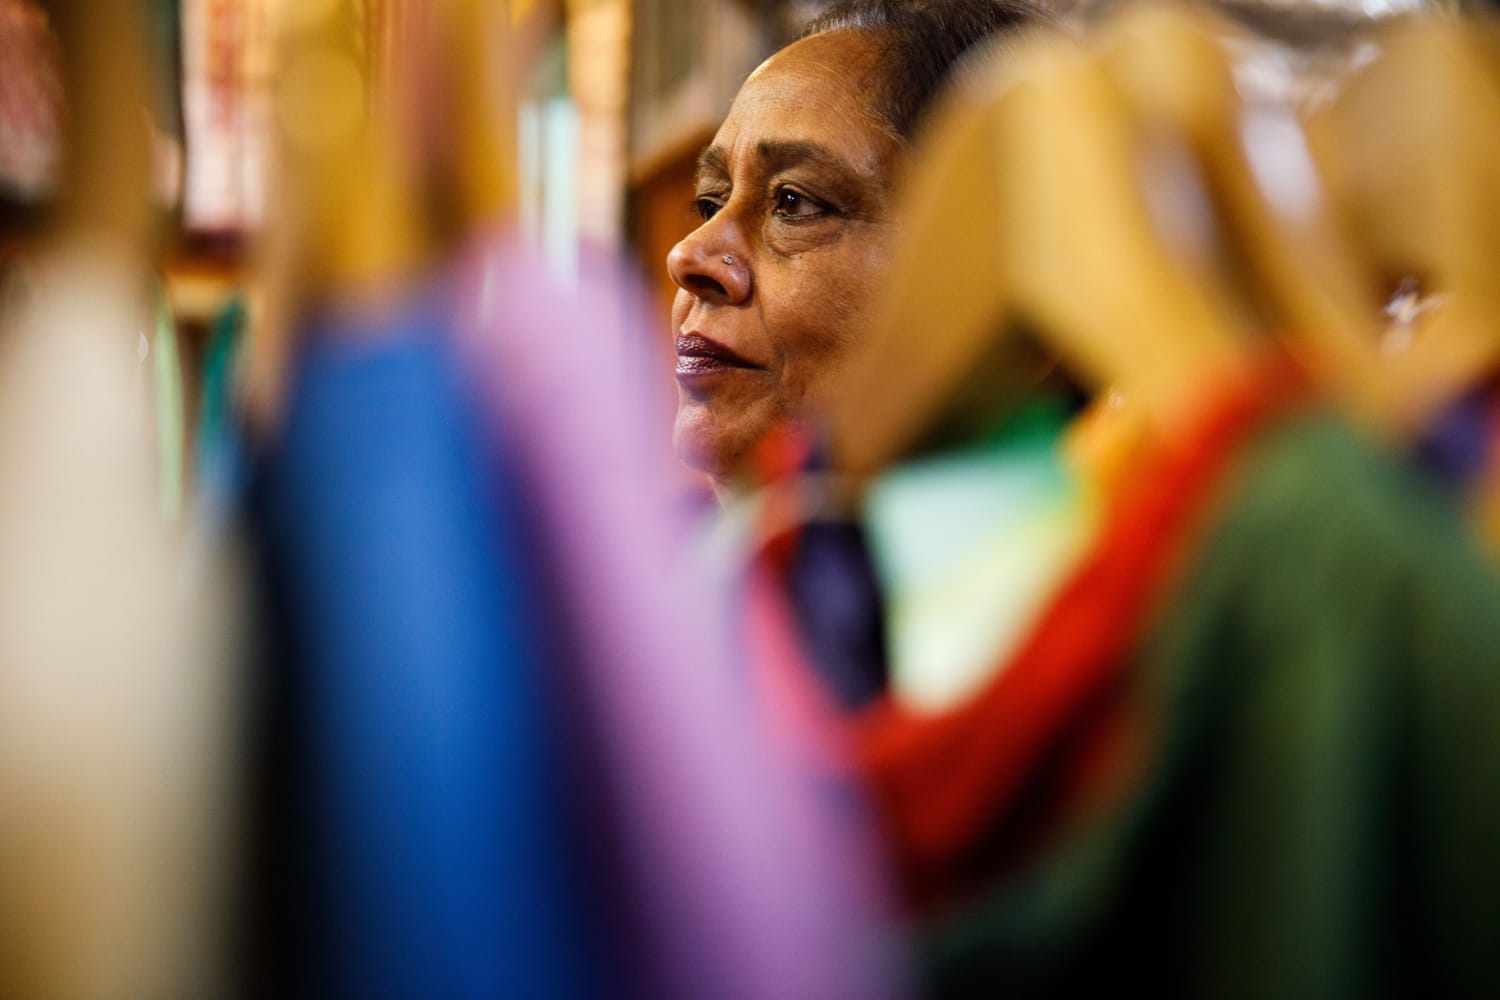 Beloved NY fabric shop that rocketed to viral fame to close after 46 years